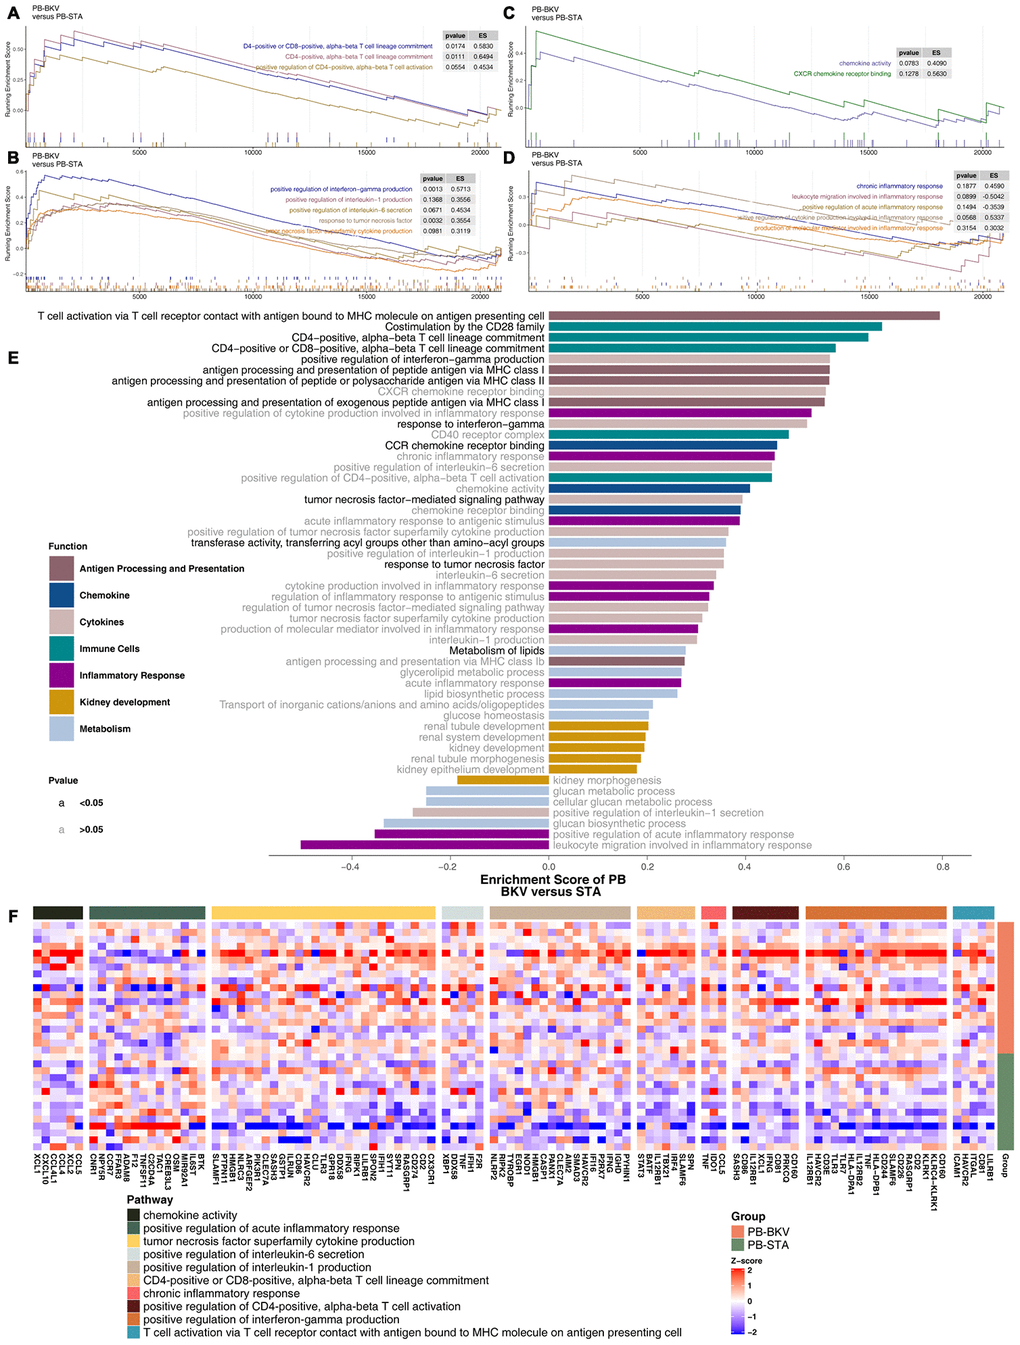 GSEA of hallmark gene sets in PB-BKV and PB-STA data downloaded from MSigDB (GSE47199 and GSE75693). GSEA results for immune cell- (A), cytokine- (B), chemokine- (C) and inflammation-related pathways (D). All transcripts were ranked by the log2(fold change) between PB-BKV and PB-STA. Each run was performed with 1,000 permutations. (E) Differences in pathway activities scored by GSEA between PB-BKV and PB-STA. Enrichment results with significant differences between PB-BKV and PB-STA are shown. The functions of the pathways are shown in the annotations. The black font indicates P  0.05. (F) Heatmap of core genes in enriched pathways (the same as those in Figure 4K, 4L) between PB-BKV and PB-STA.